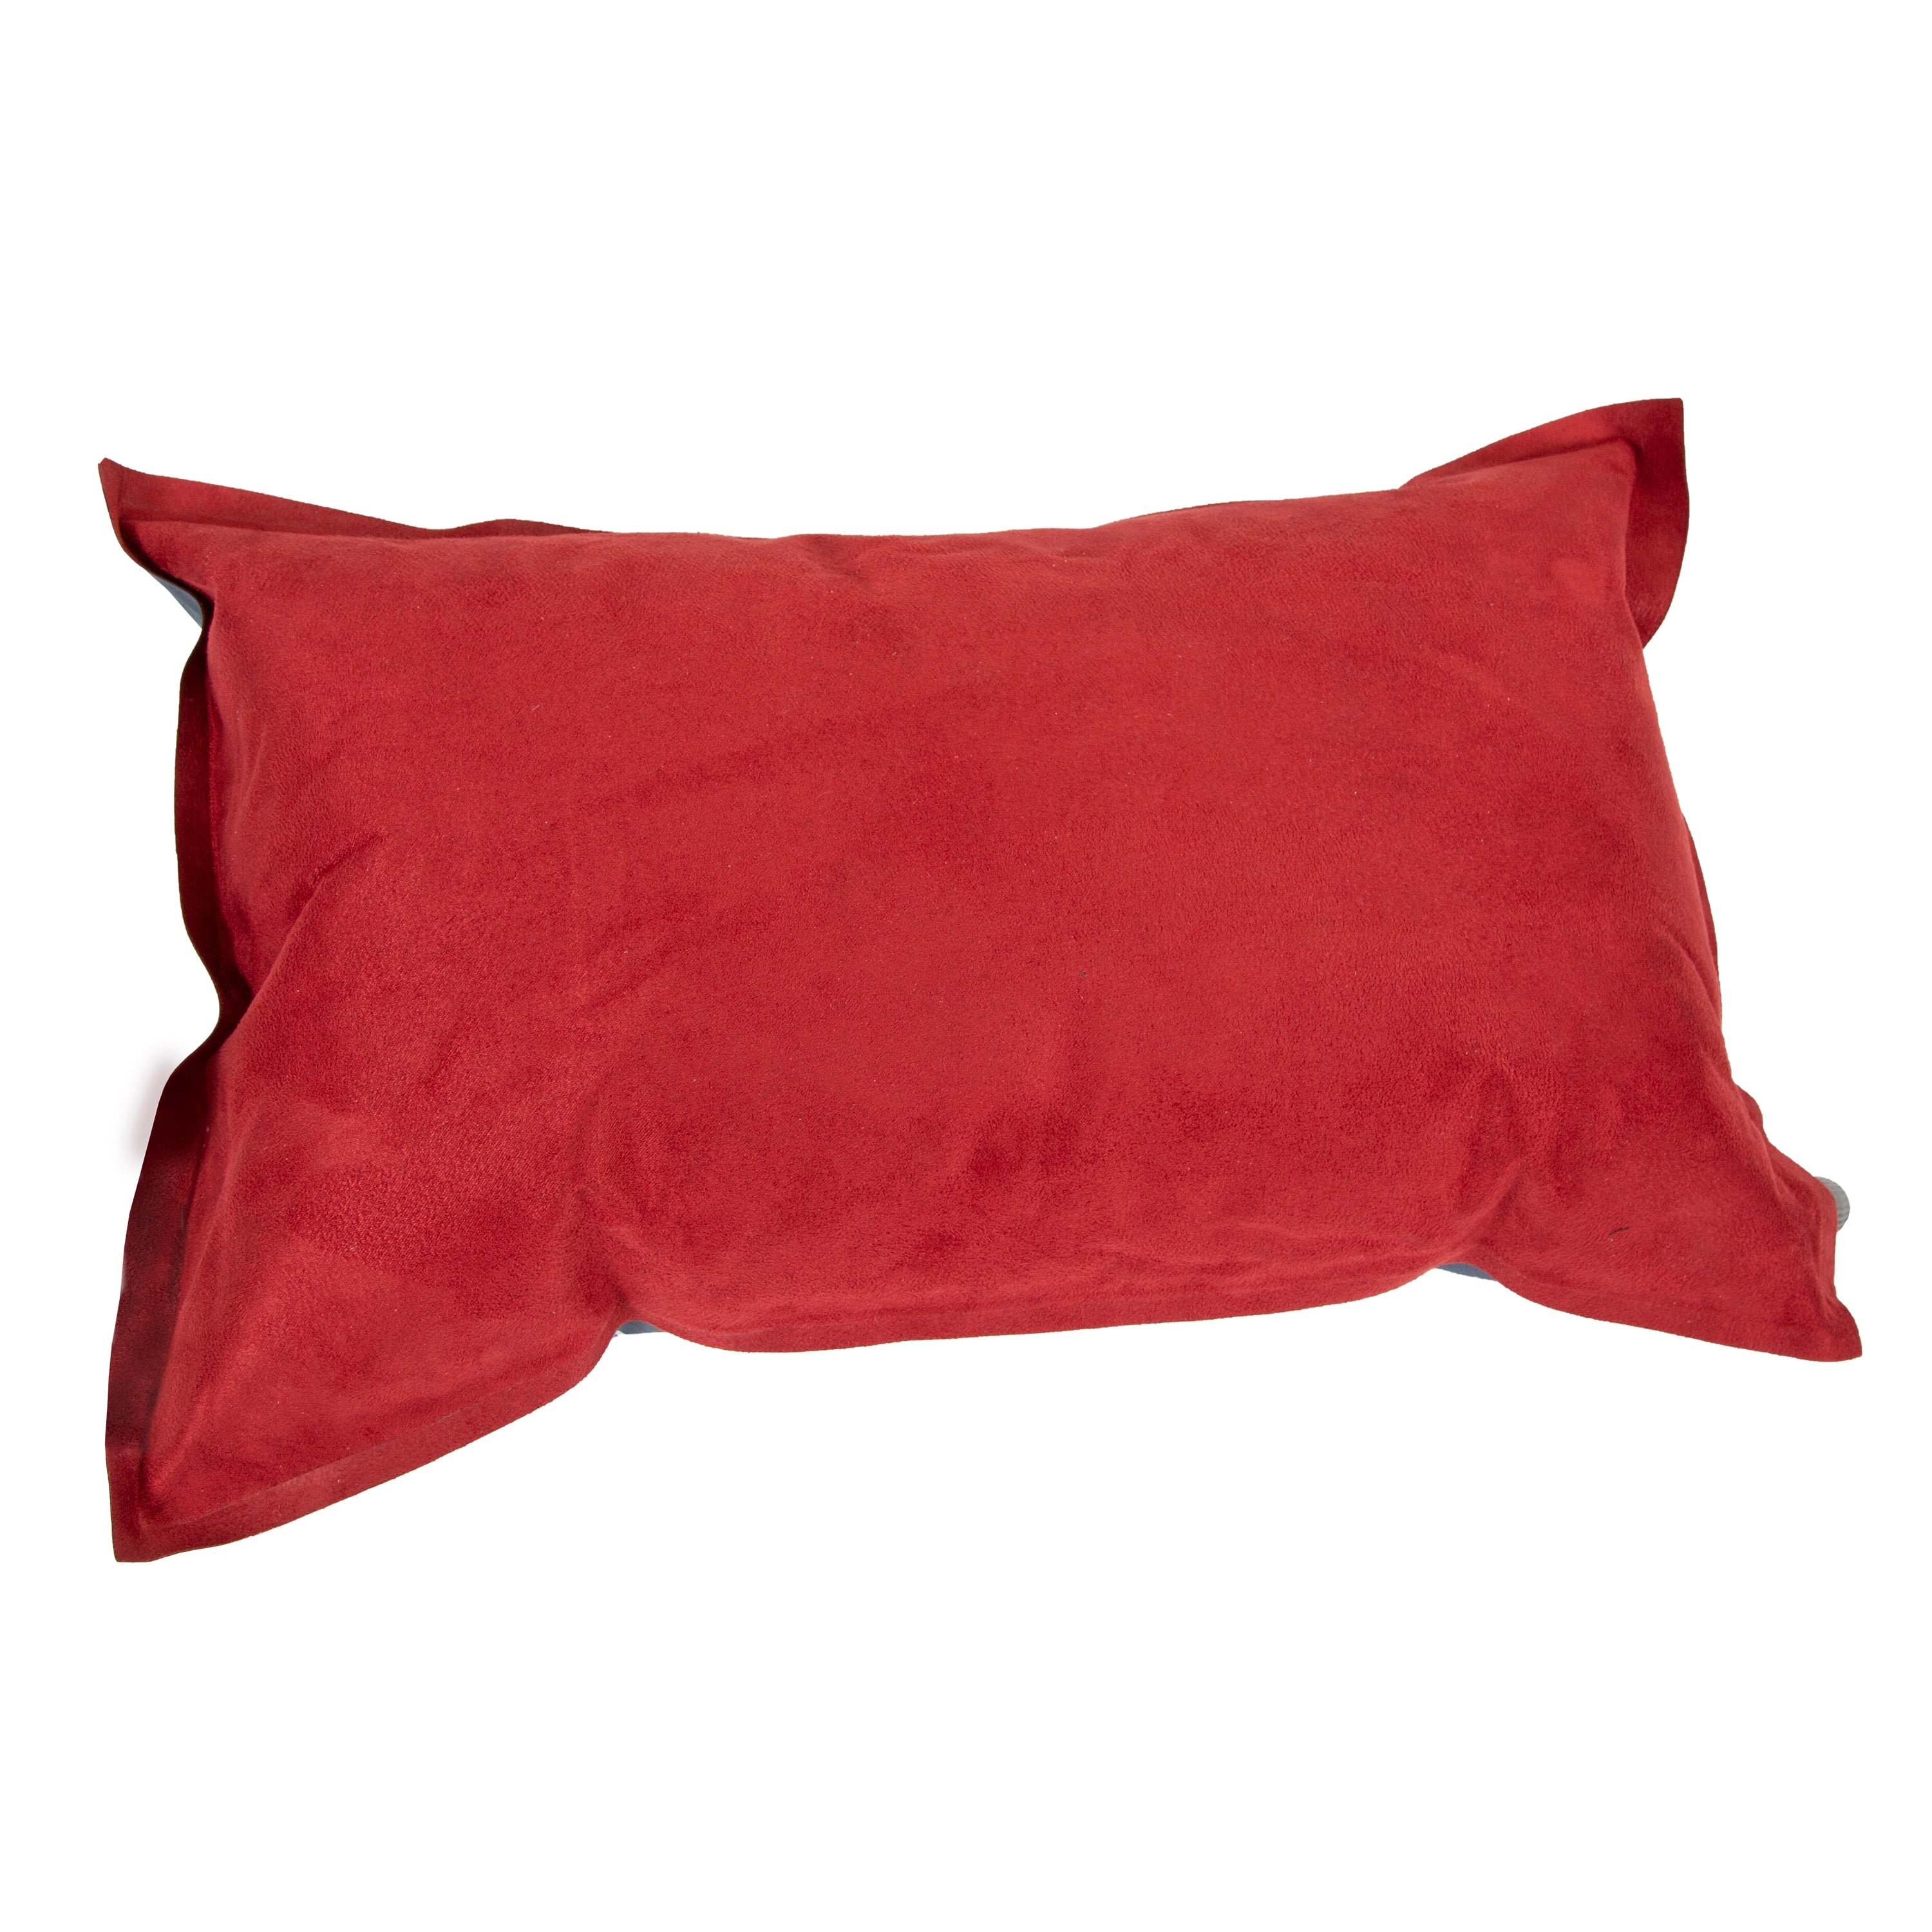 Self Inflating Pillow / Seat Cushion - 12 Inch X 20 Inch